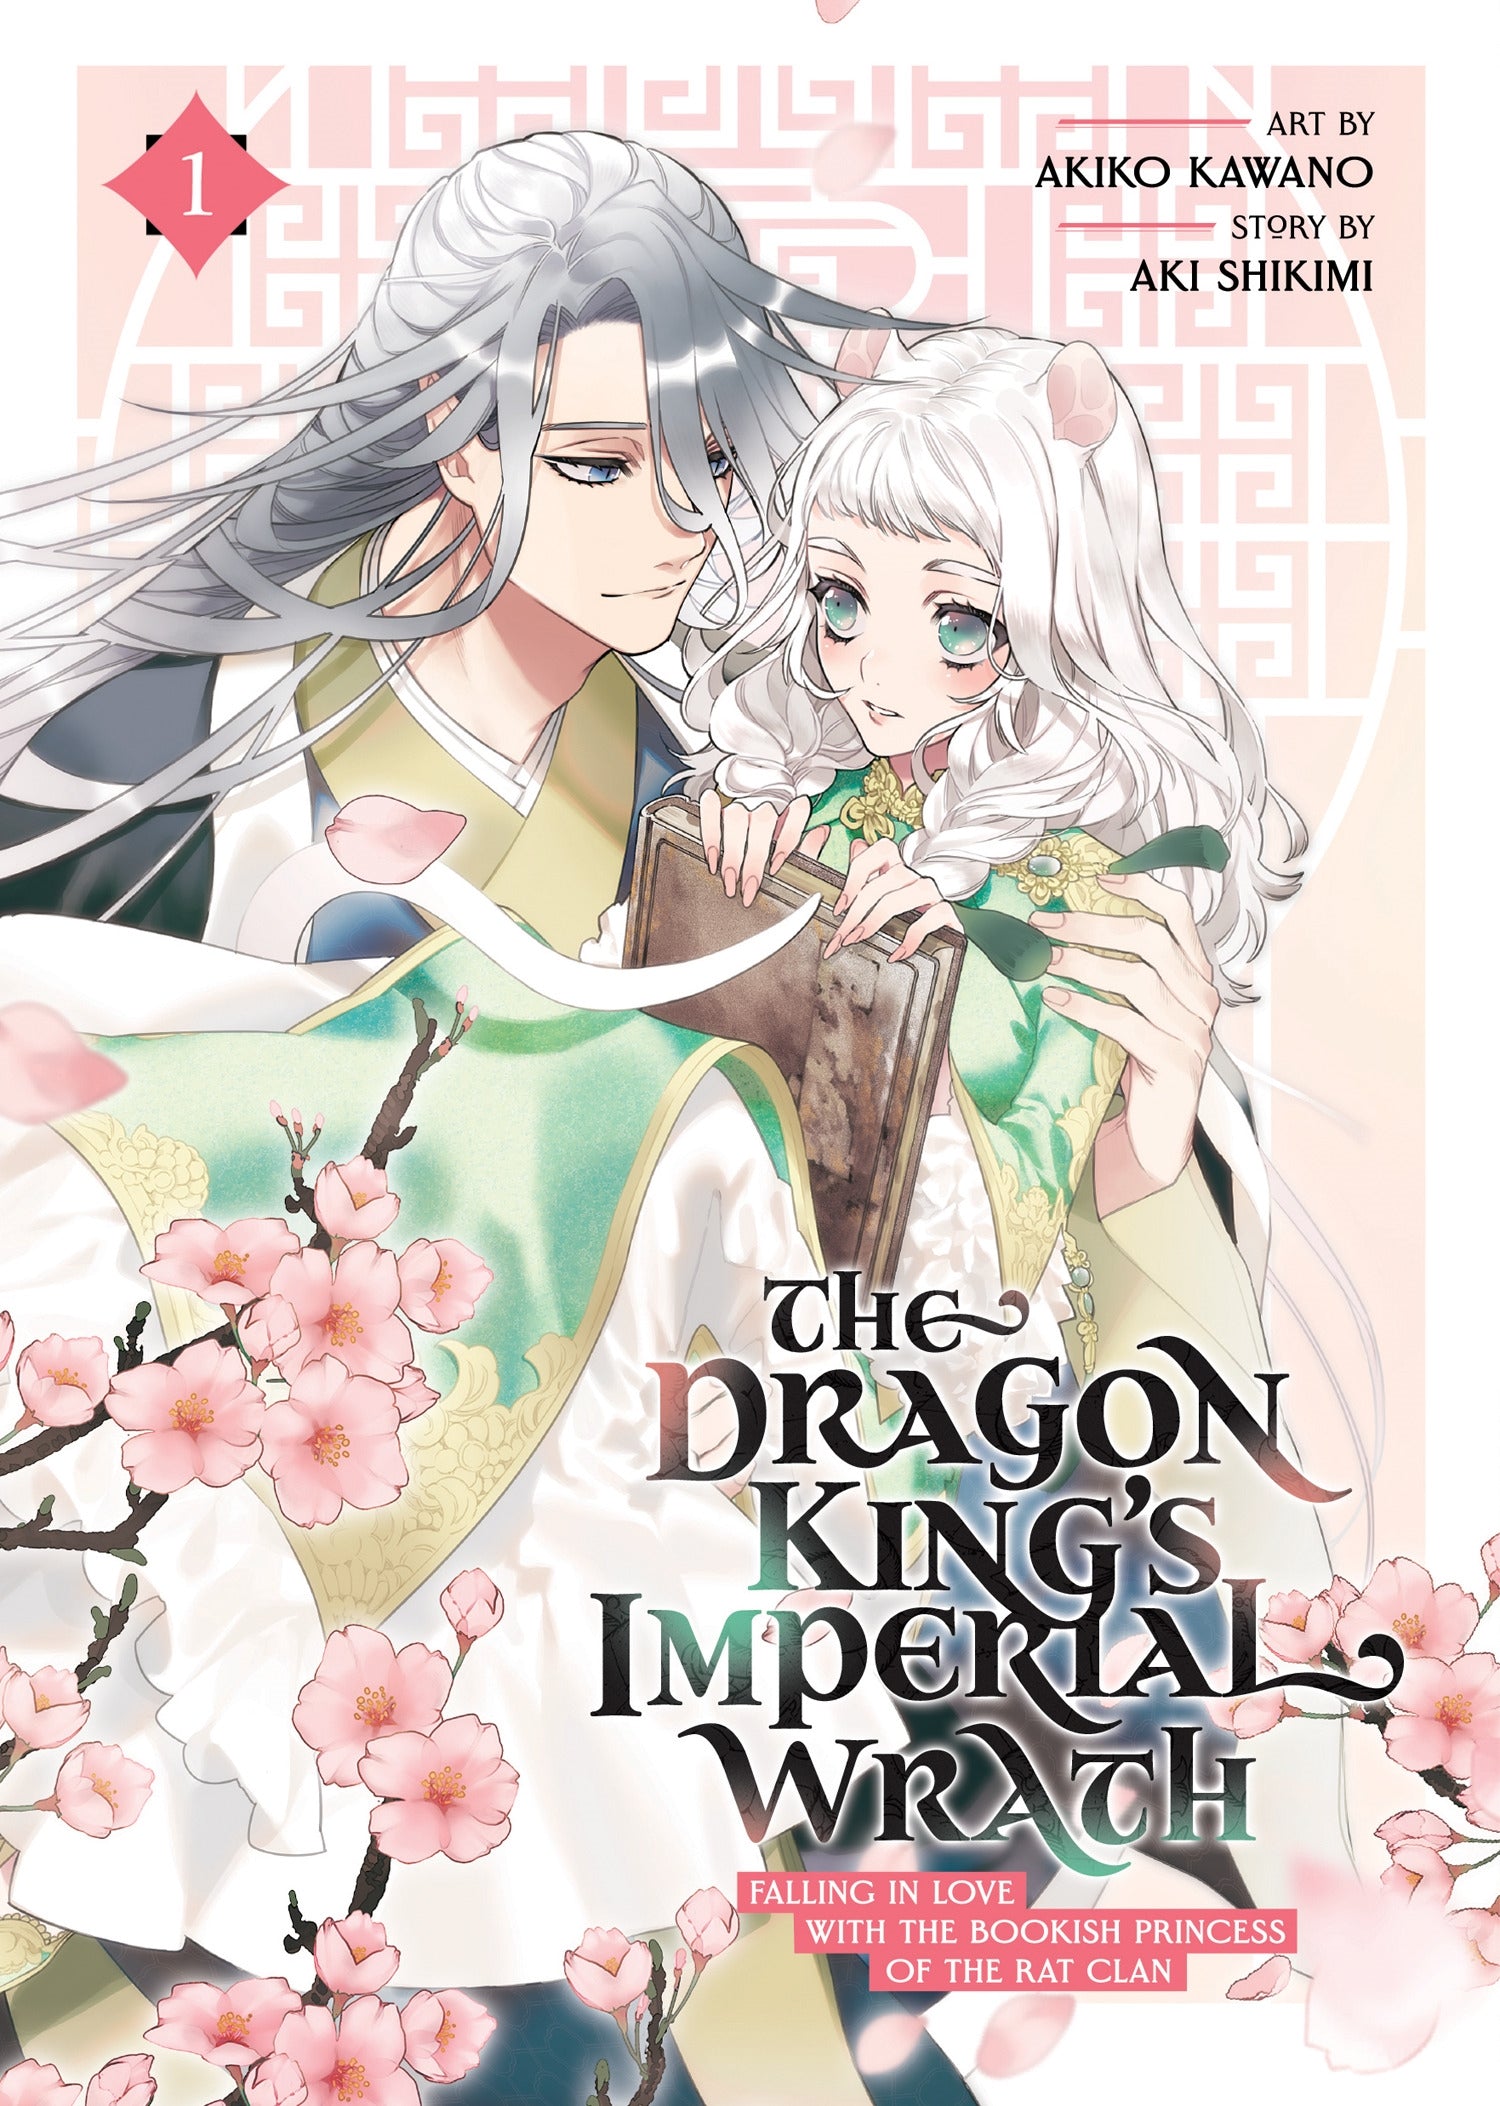 The Dragon King's Imperial Wrath Falling in Love with the Bookish Princess of the Rat Clan Vol. 1